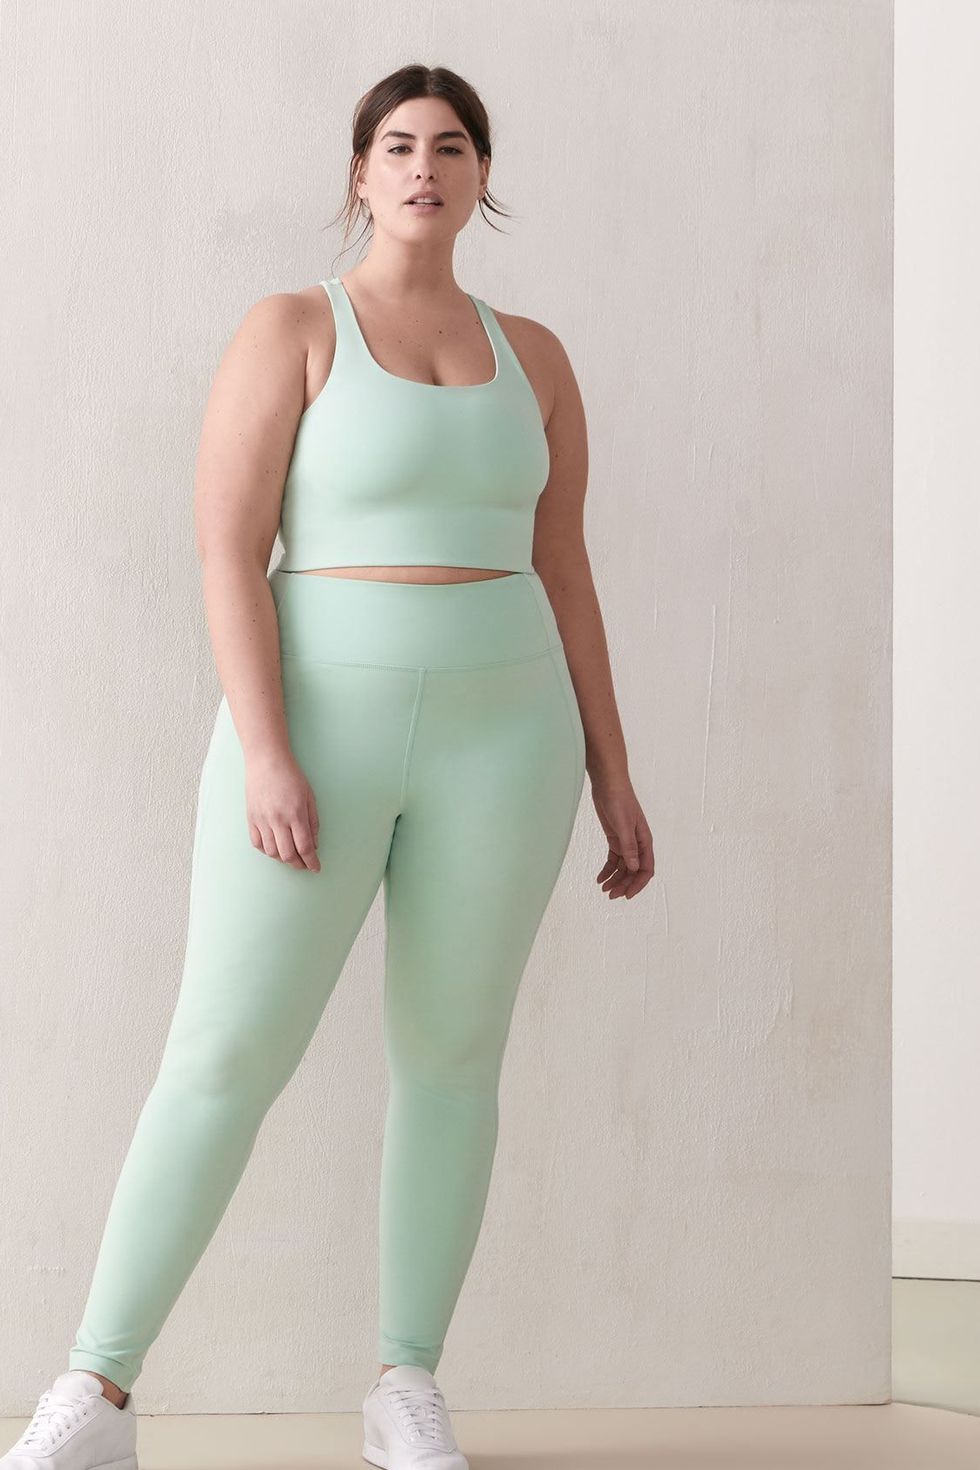 20 Cute Yoga Outfits - Best Yoga Apparel for 2022